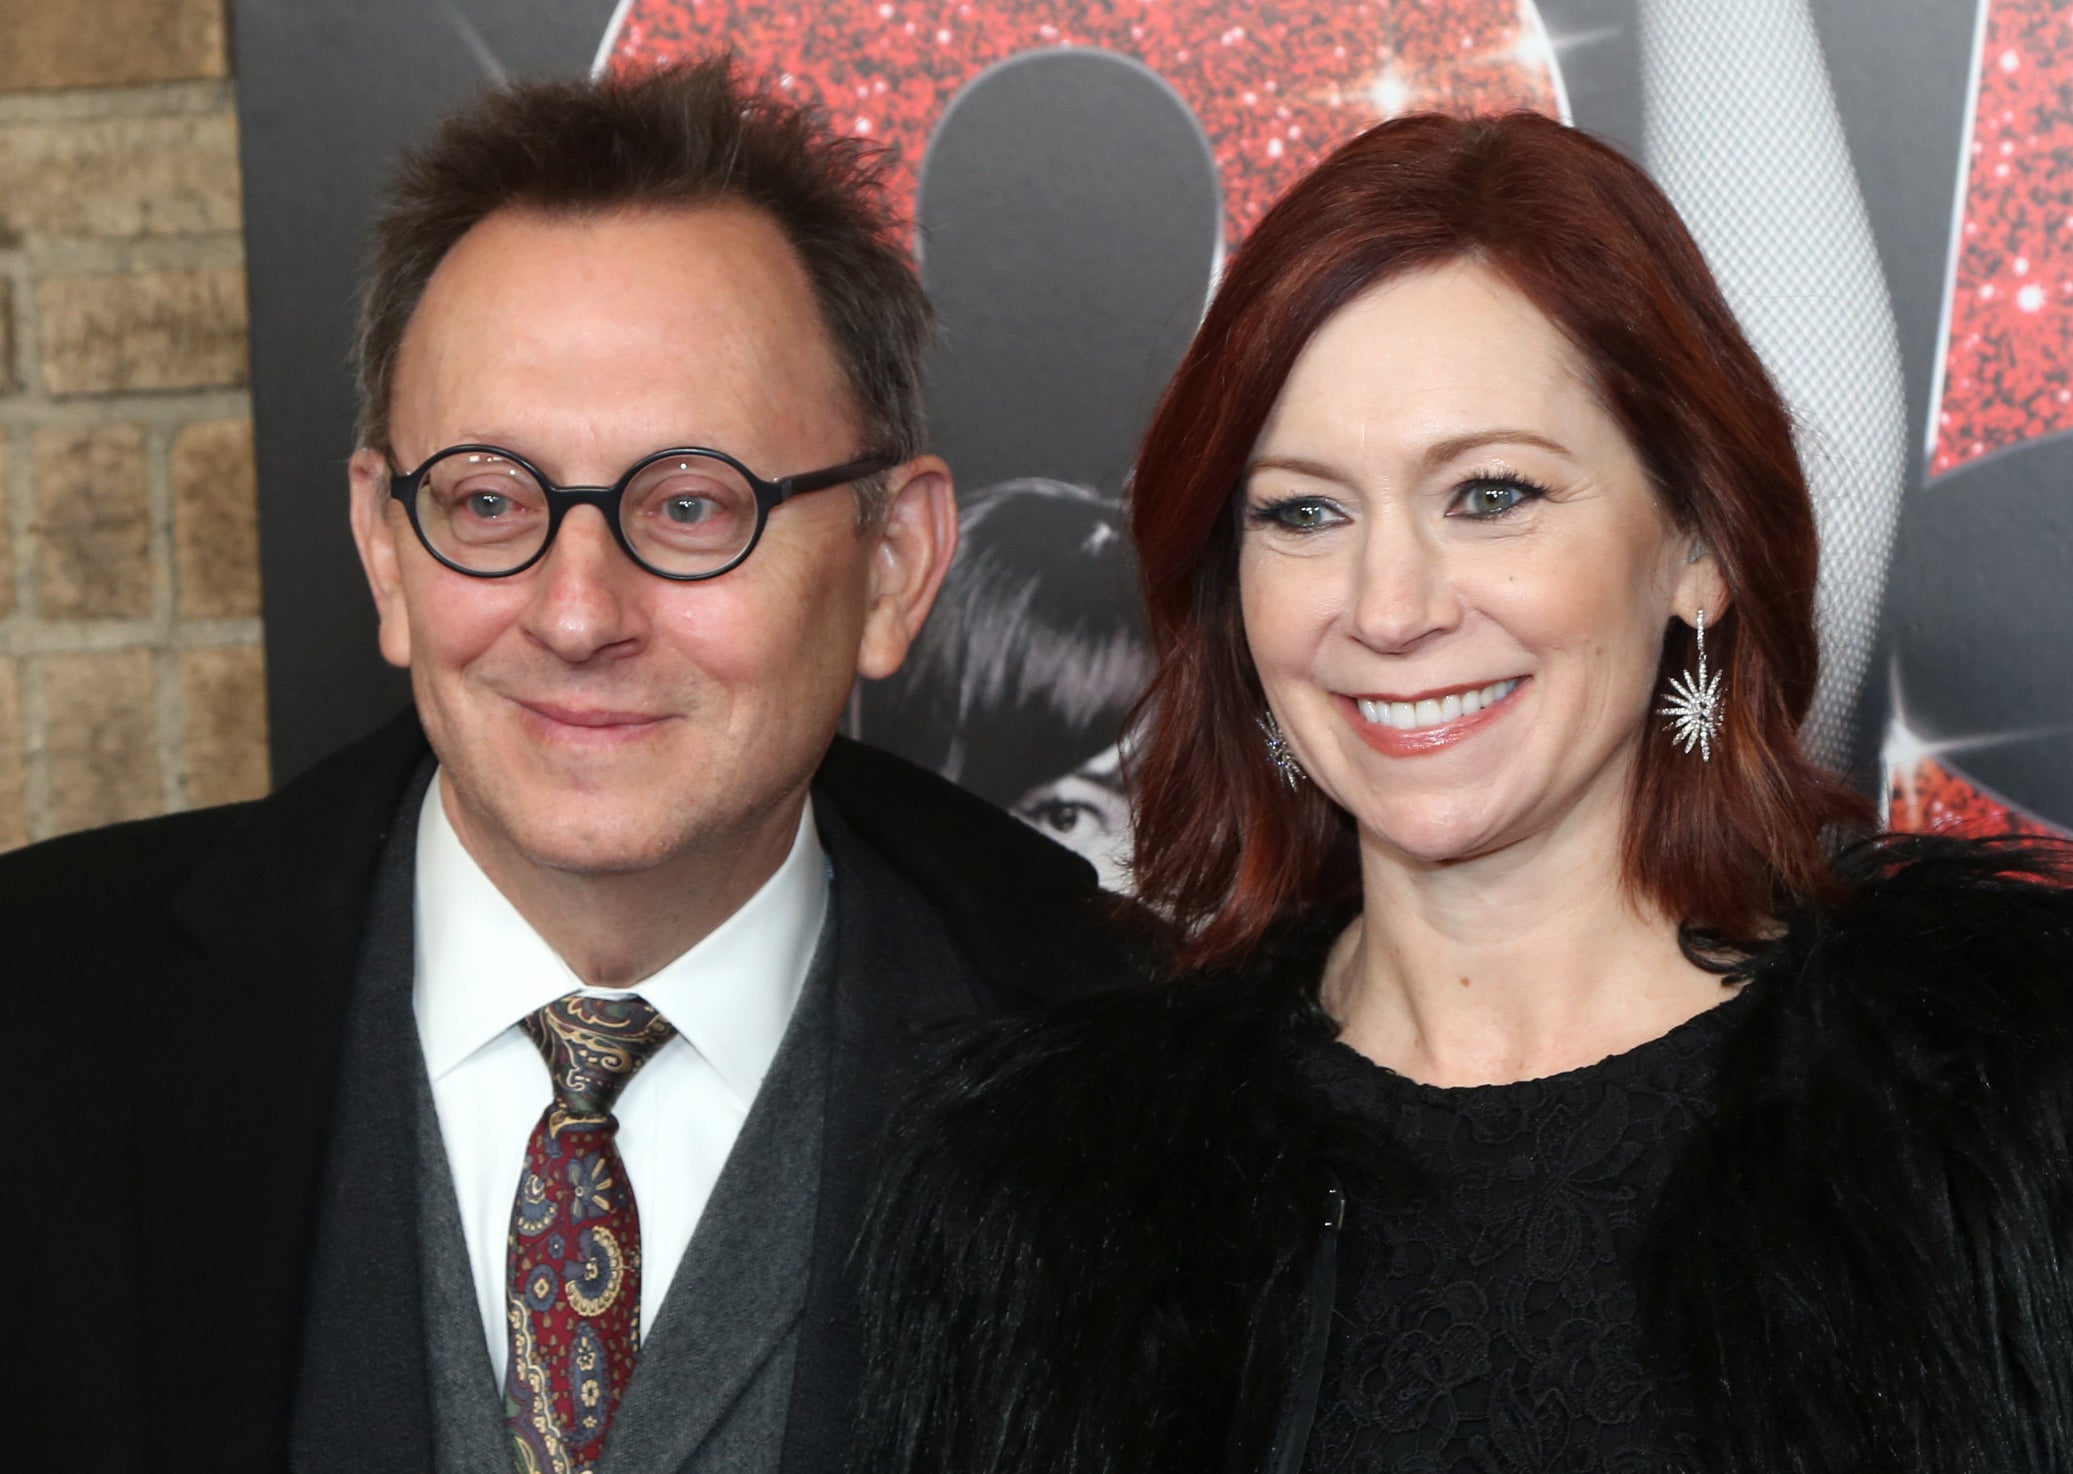 Michael Emerson and Carrie Preston smiling together